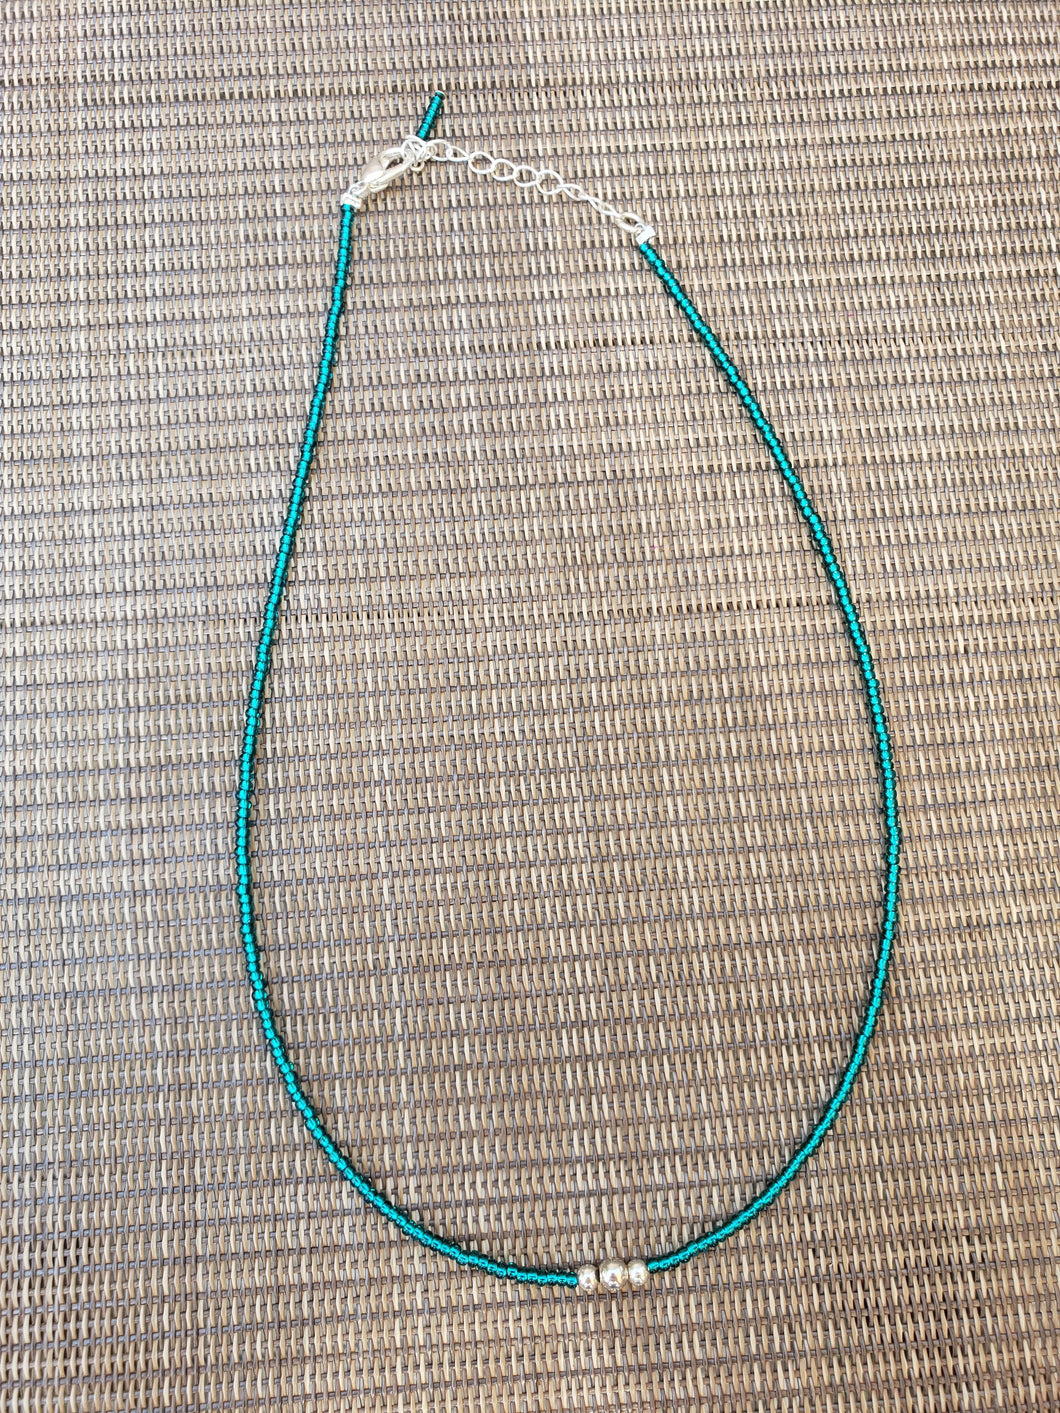 Teal Choker with Sterling Silver-NS-15-0010